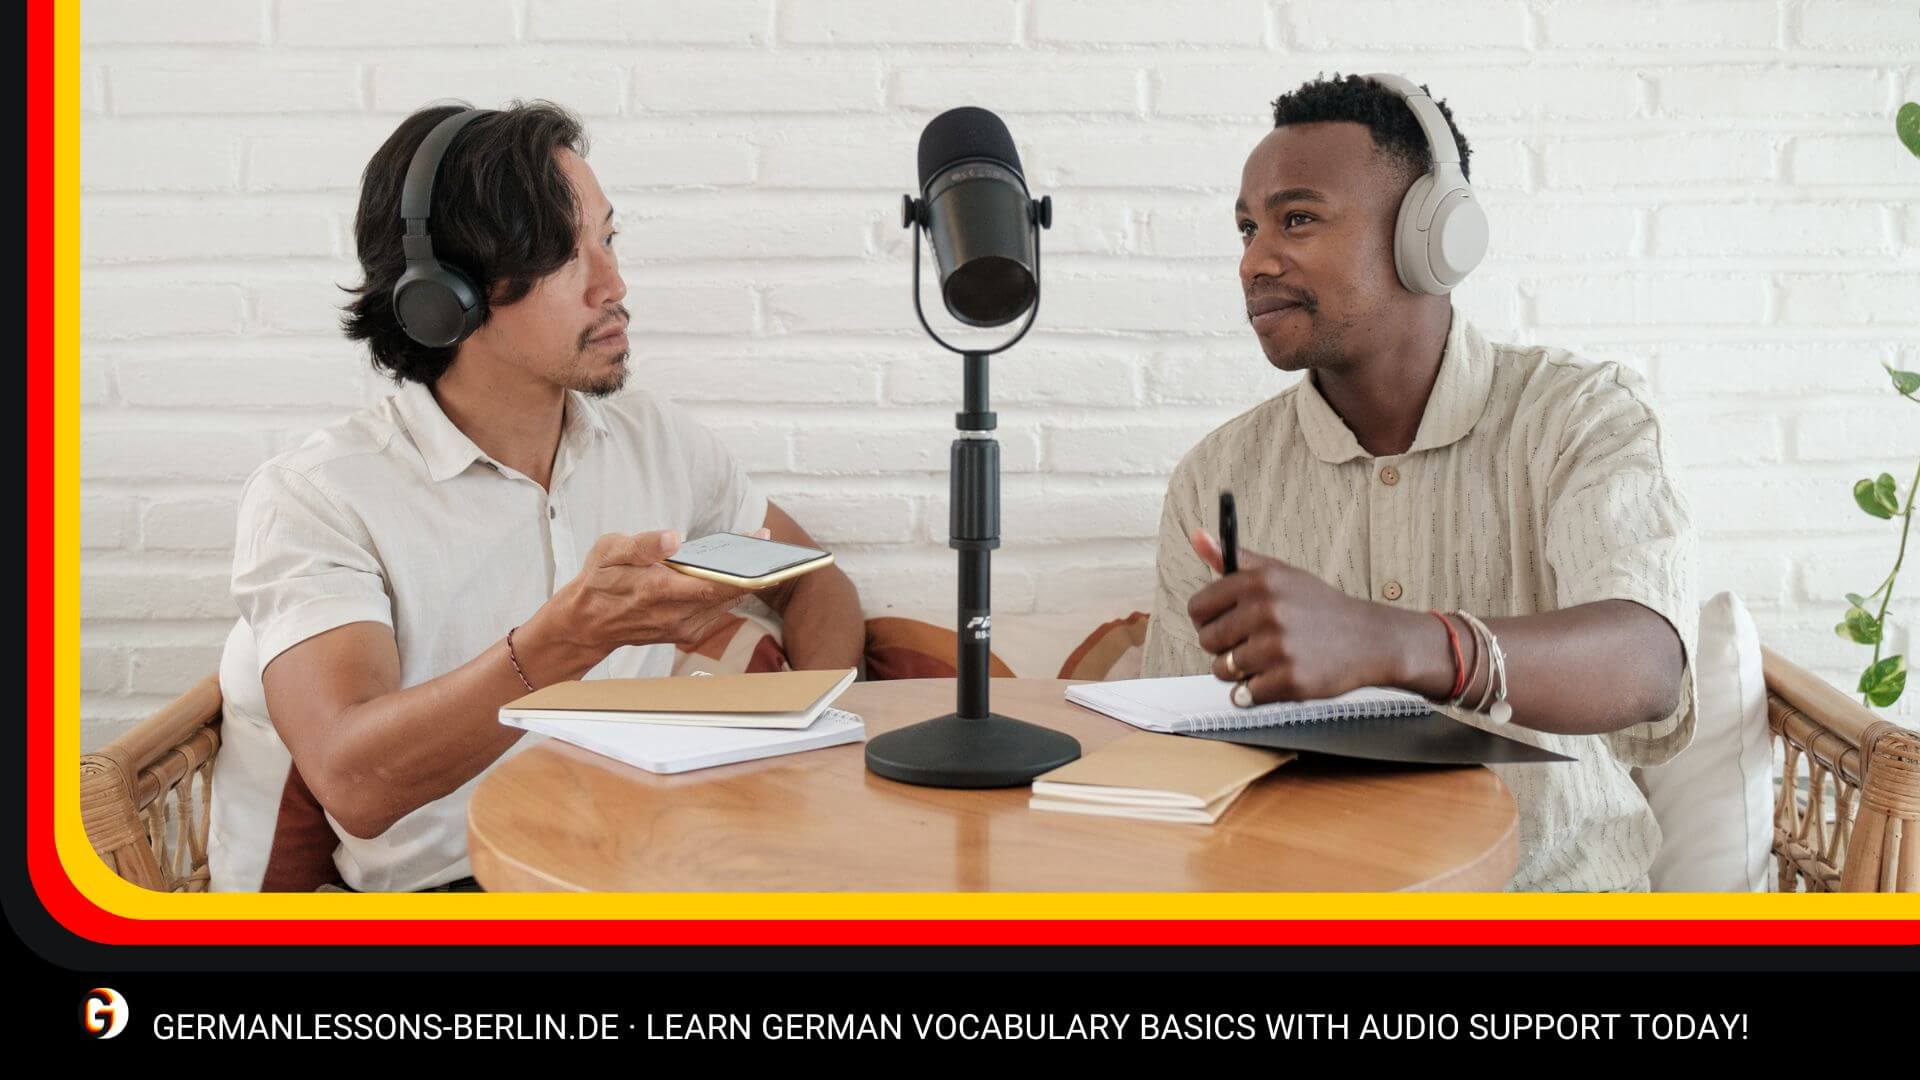 Learn German Vocabulary Basics With Audio Support Today!